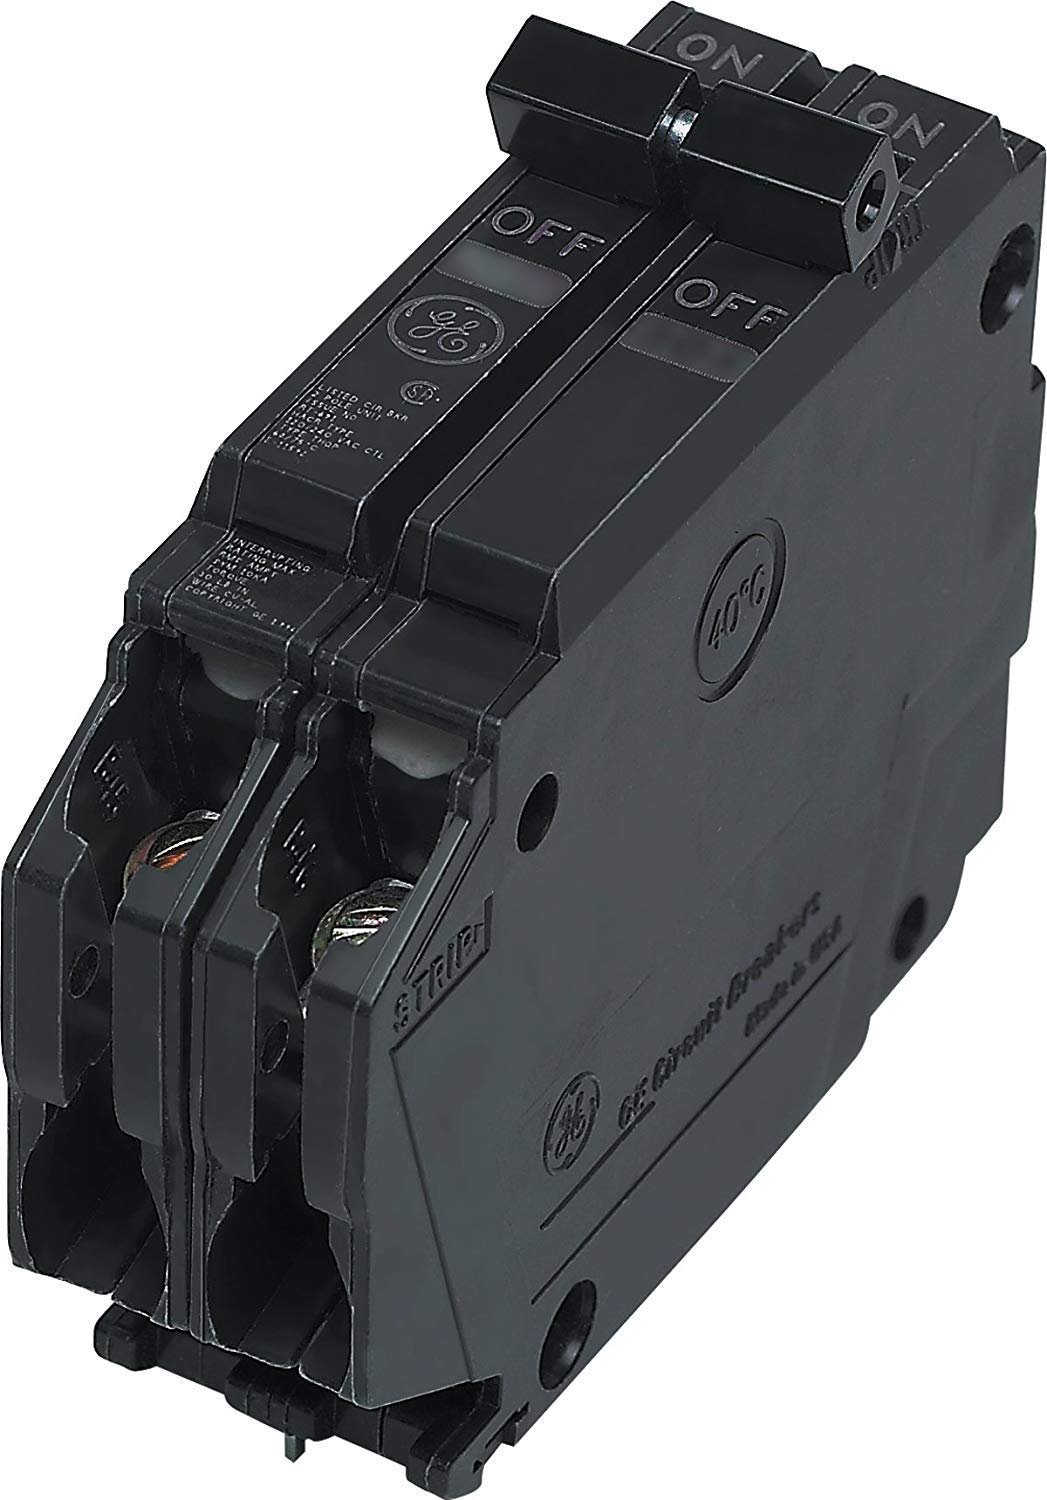 General Electric THQP215 Circuit Breaker, 2-Pole 15-Amp Thin Series - image 1 of 1